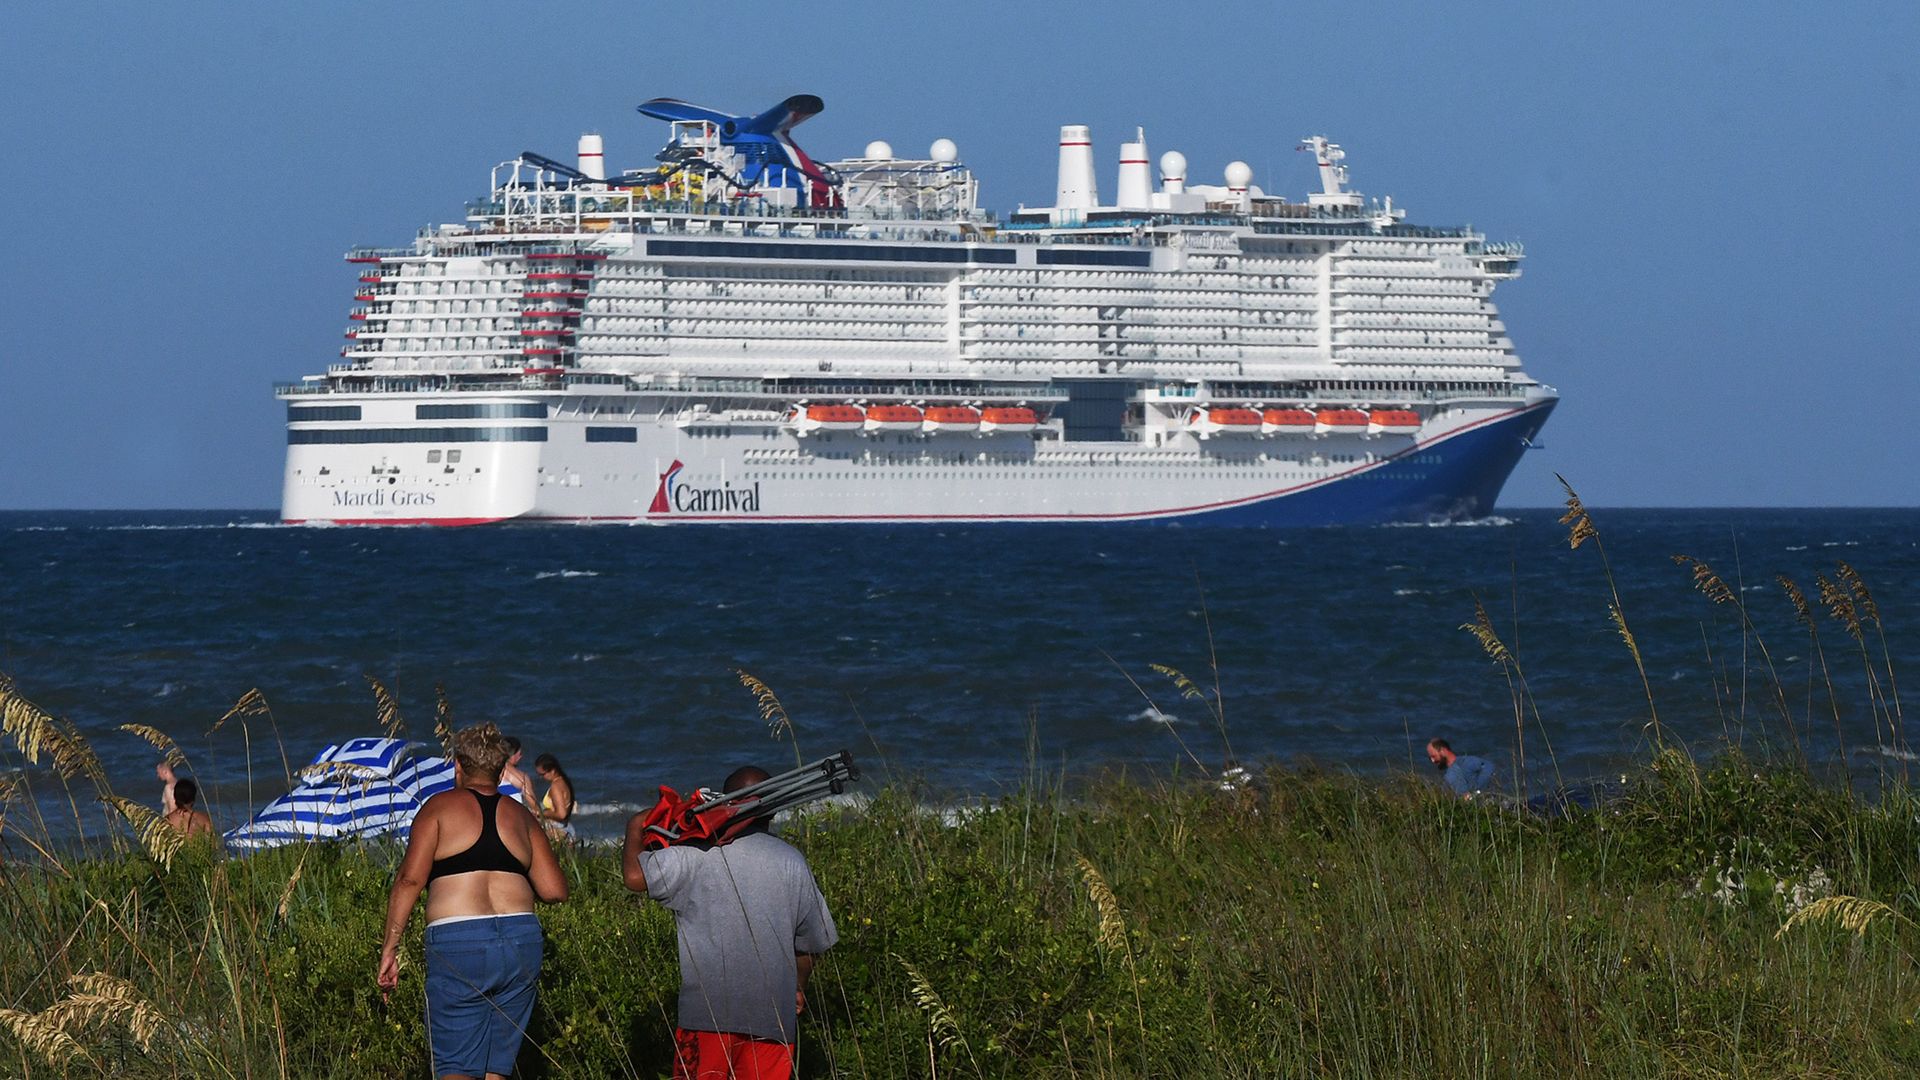 People come out to watch the new Carnival Cruise Line ship Mardi Gras as it departs on its maiden voyage, a seven-day cruise to the Caribbean from Port Canaveral, Florida on July 31, 2021.